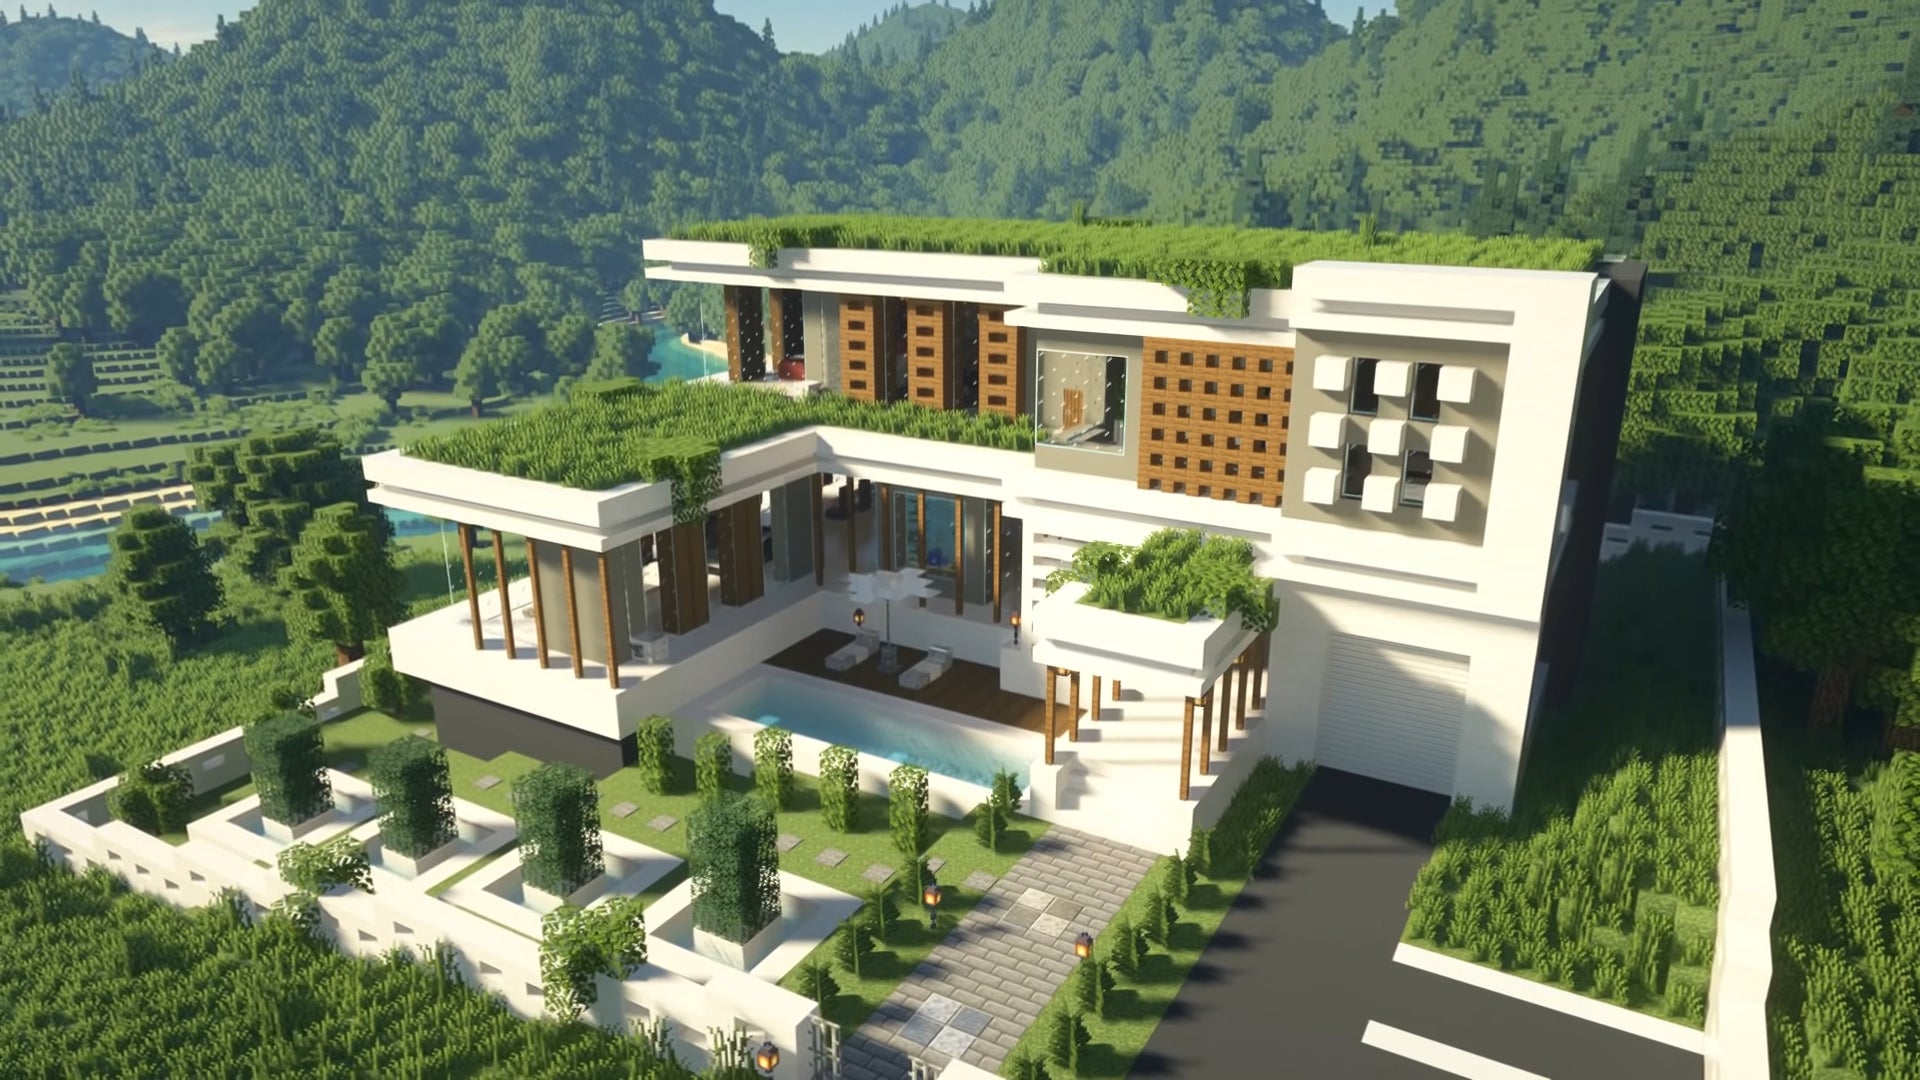 A luxury modern house in Minecraft, built by YouTuber OSHACRA.